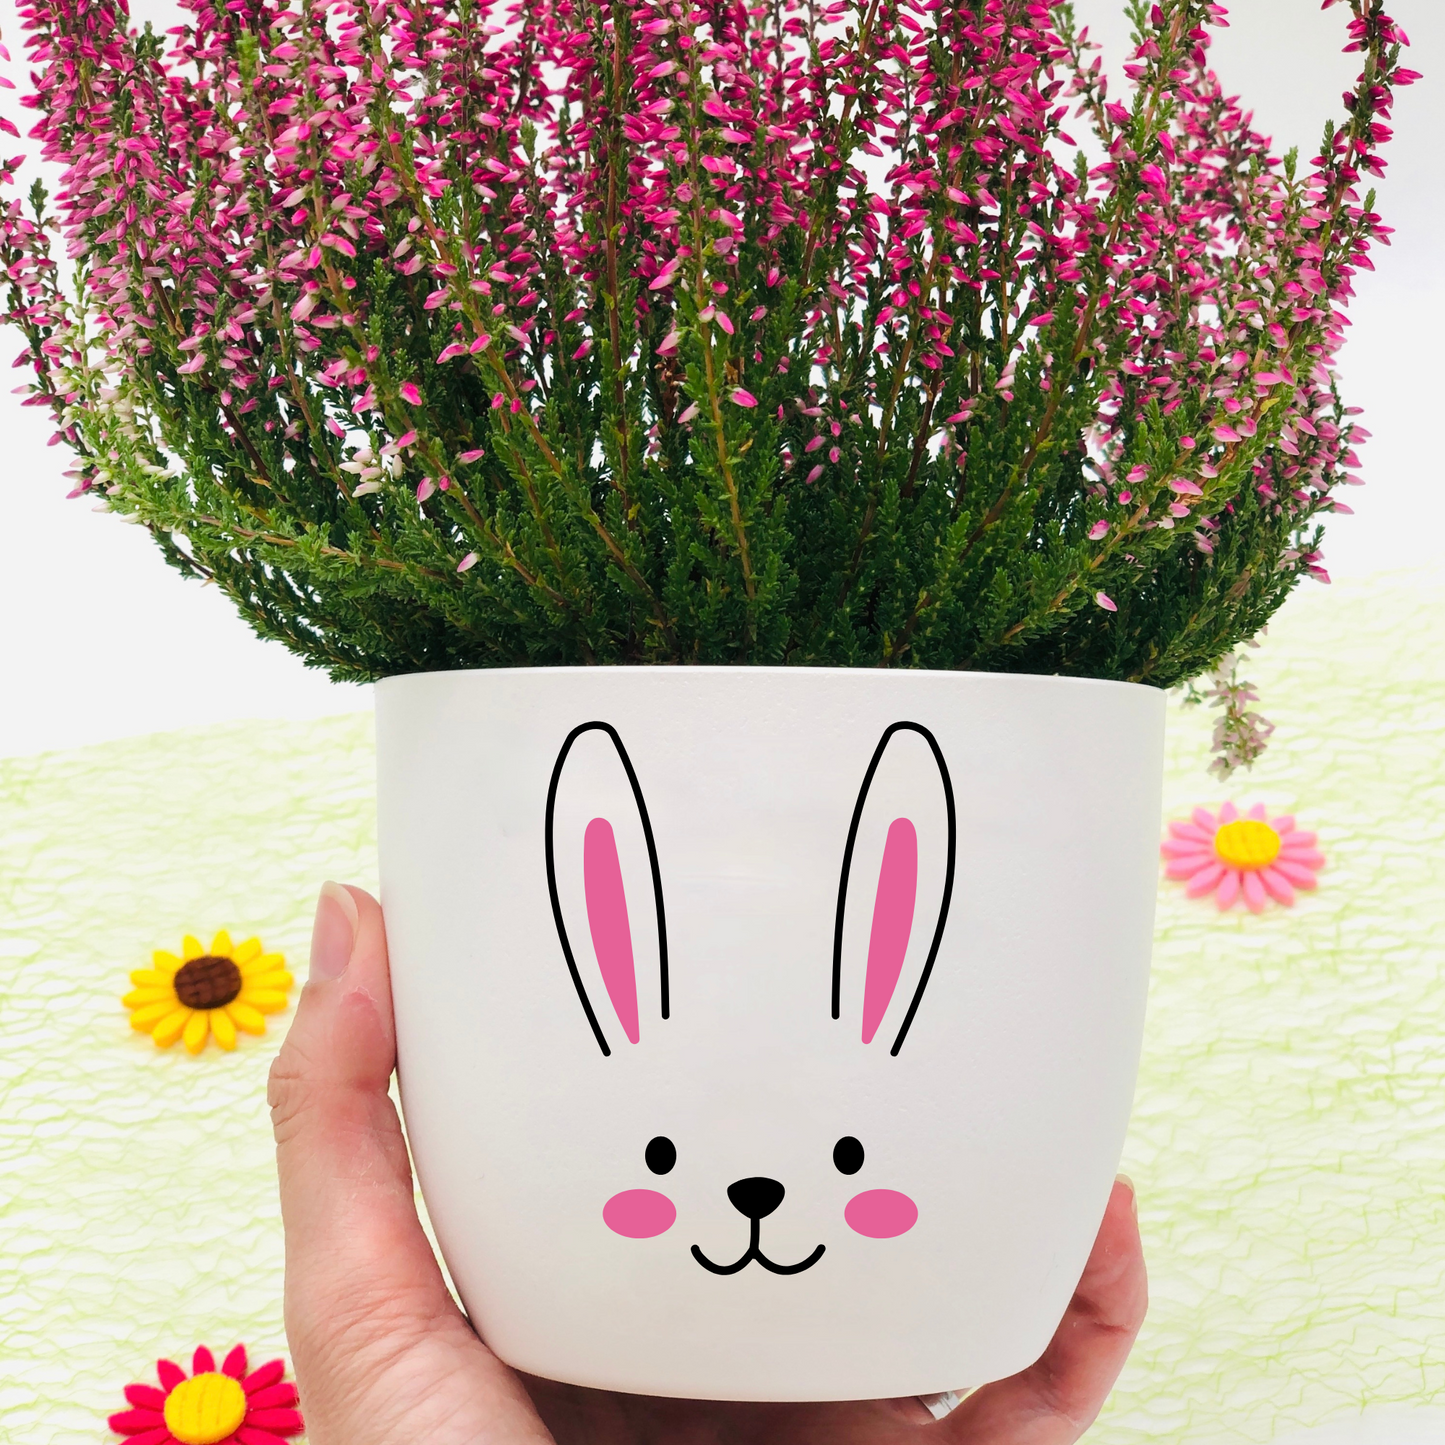 Flower pot cute animal face - gift idea child - planter animal face - happy plant pot children's room - decoration child personalized